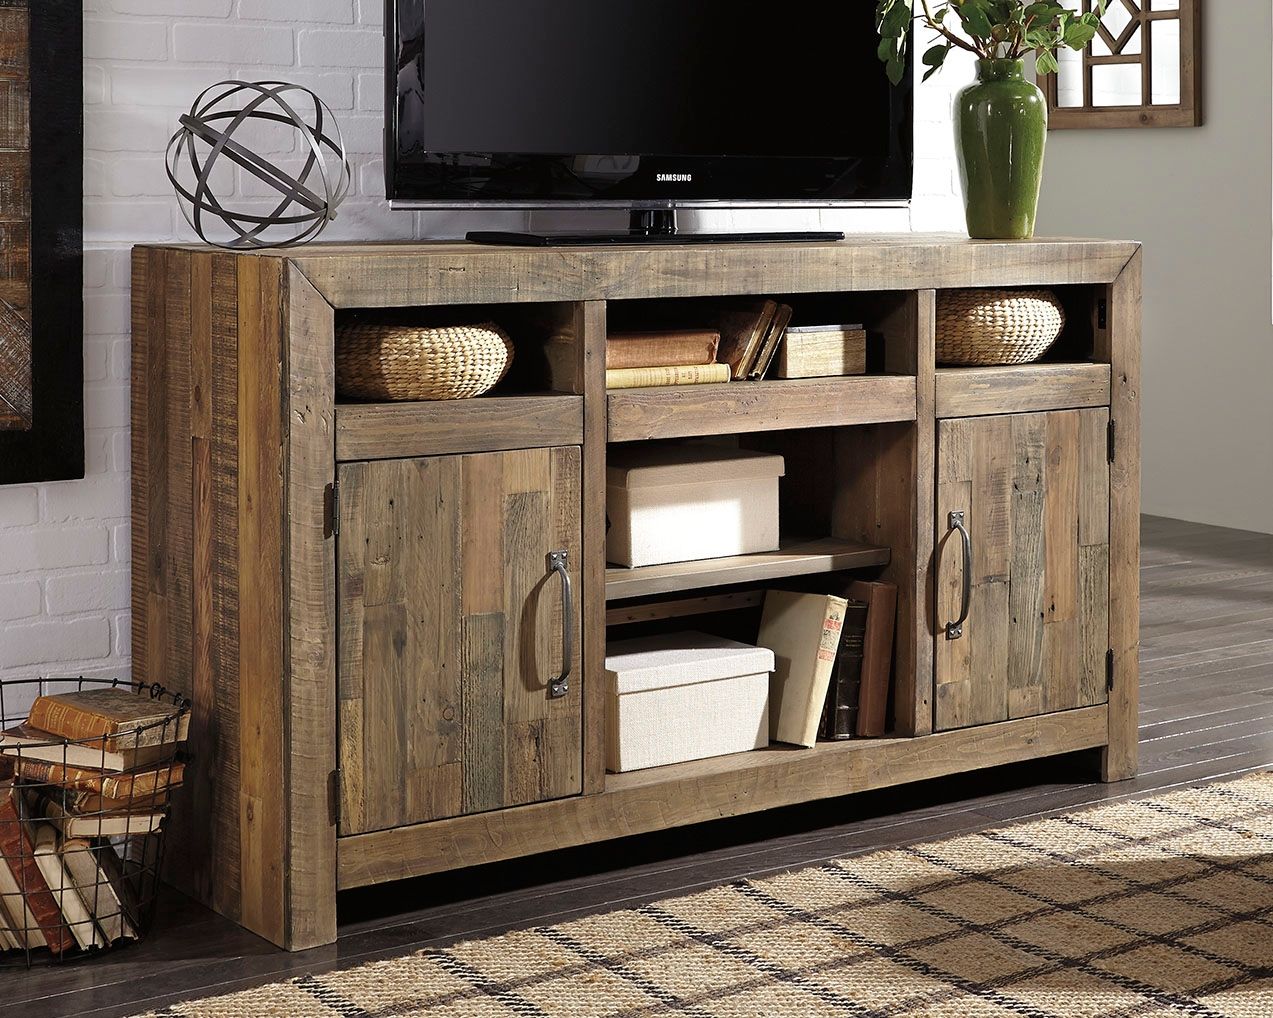 Sommerford - Brown - LG TV Stand W/Fireplace Option - Tony's Home Furnishings